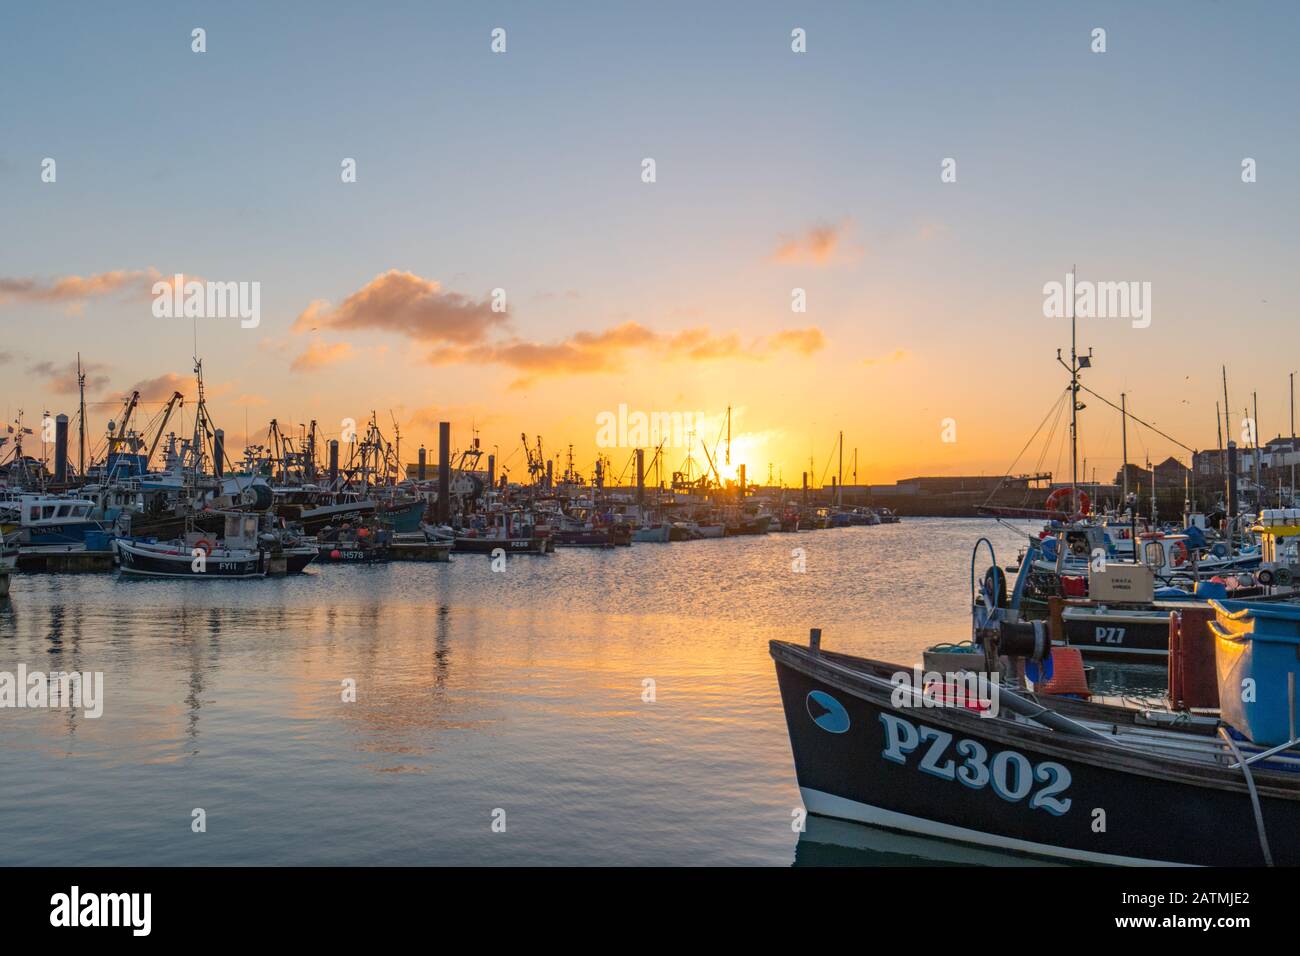 Newlyn, Cornwall, UK. 4th February 2020. UK Weather. A cold wind and clear skies brought a chilly start to the day on the seafront at Newlyn this morning. Credit Simon Maycock  / Alamy Live News. Stock Photo